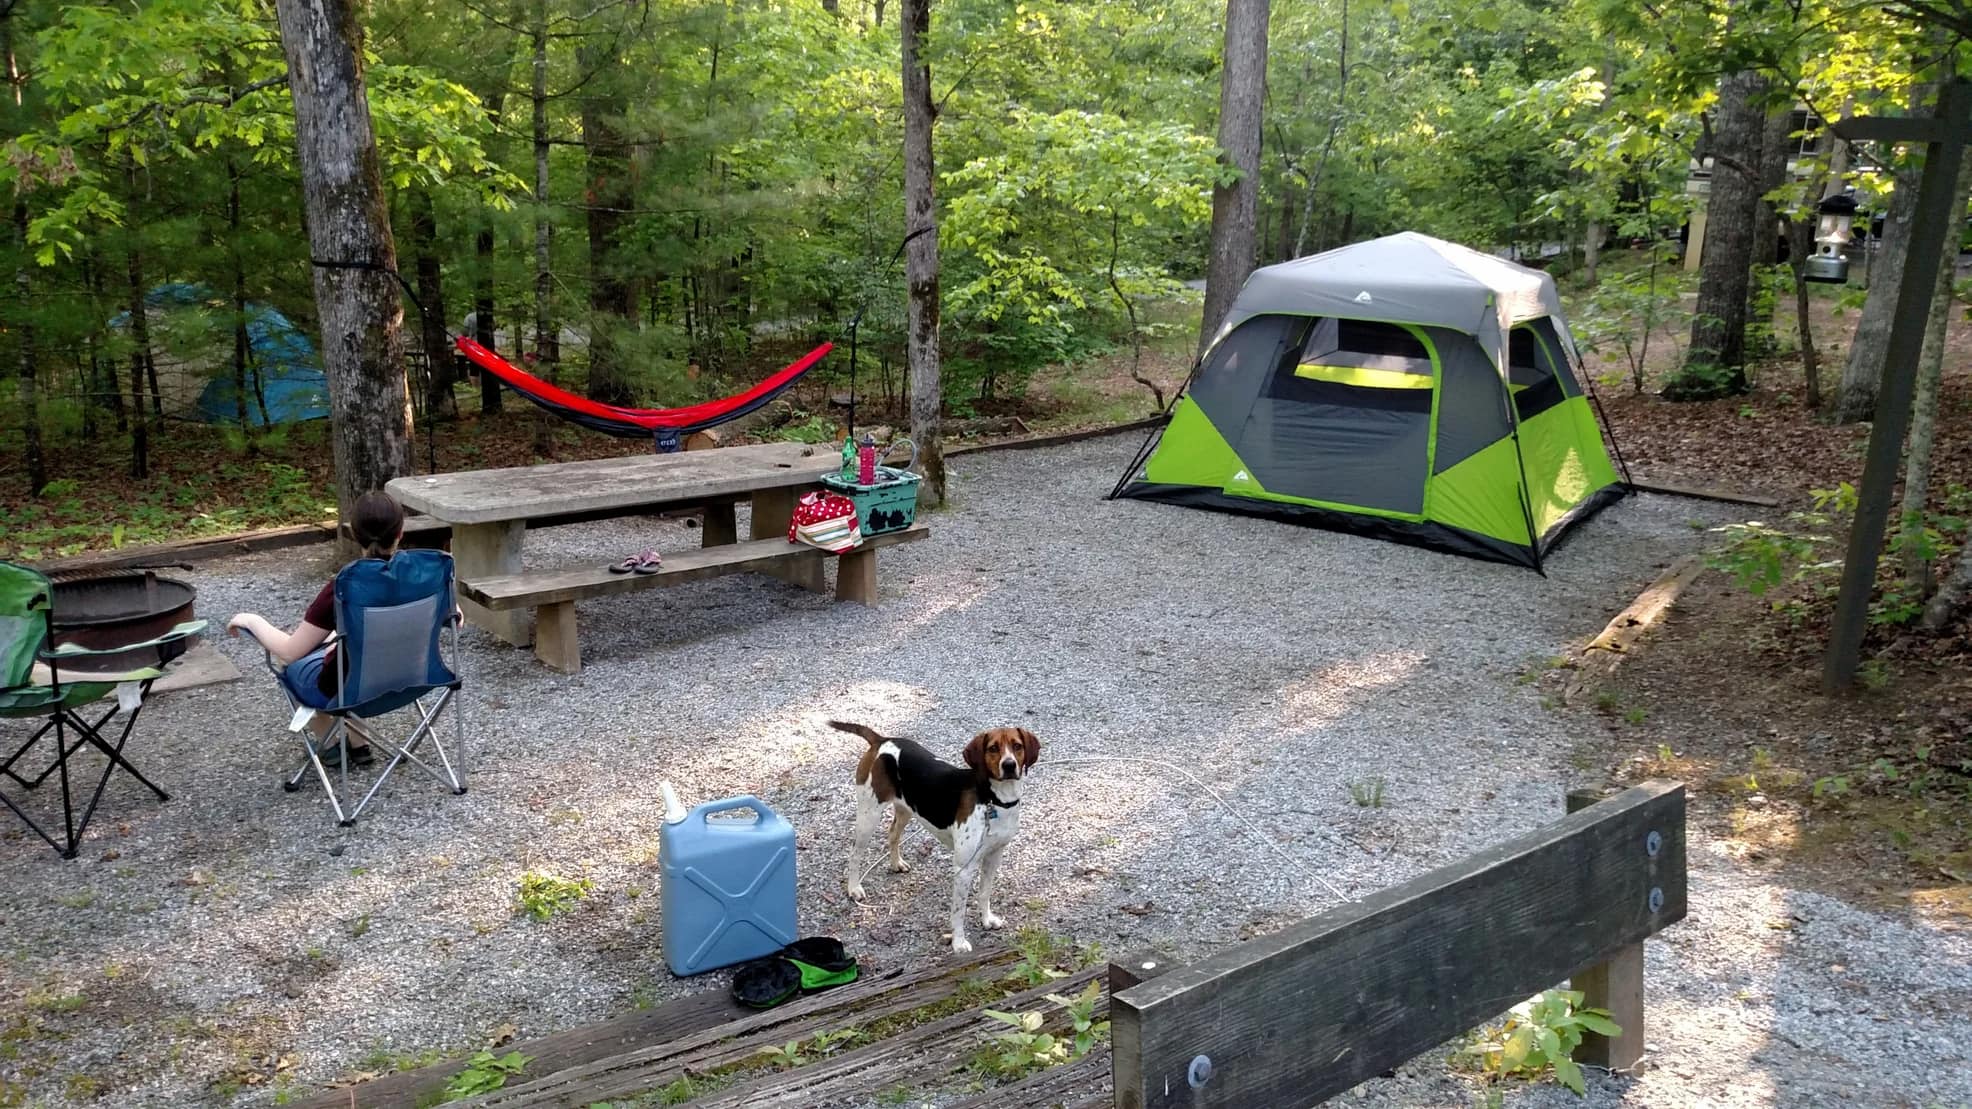 Campsite in the forest with tent, hammock, picnic table, and a dog.